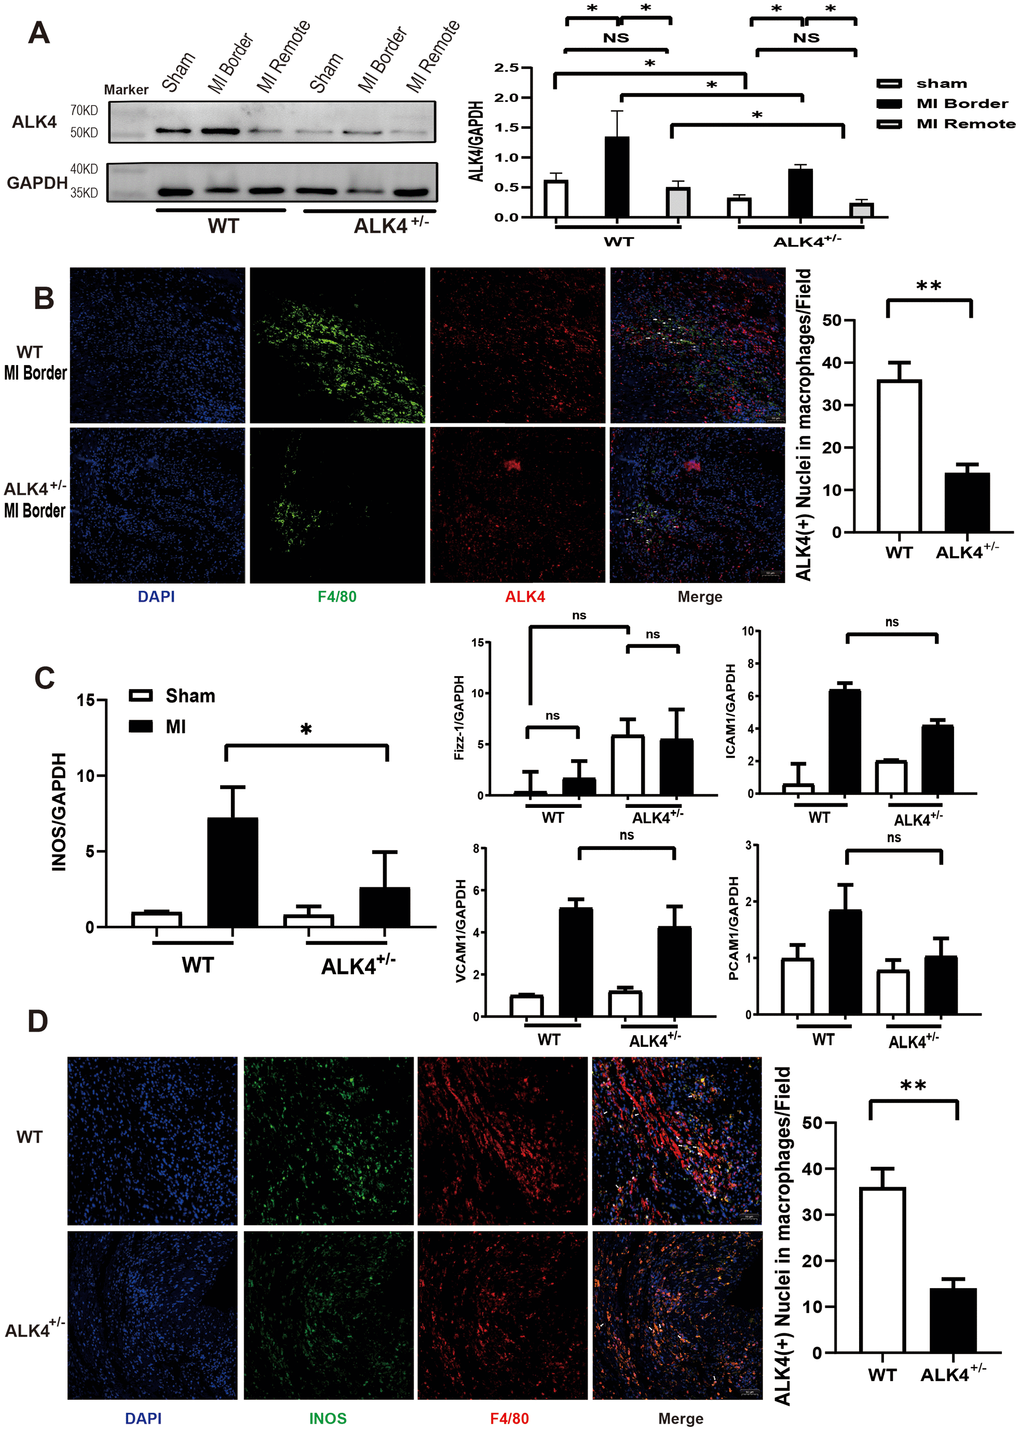 ALK4 haplodeficency reduces cardiac inflammation after myocardial injury. (A) ALK4 protein expression in WT and ALK4+/- mice in 4 groups (n=4 for each). (B) ALK4 protein expression in macrophages in WT and ALK4+/- mice on the 3rd day post-MI (n=5). (C) The mRNA expression of iNOS, Fizz-1, ICAM1, VCAM1 and PECAM1 were showed. (D) INOS expression in WT and ALK4+/- mice on the 3rd day post-MI (n=5). *P 